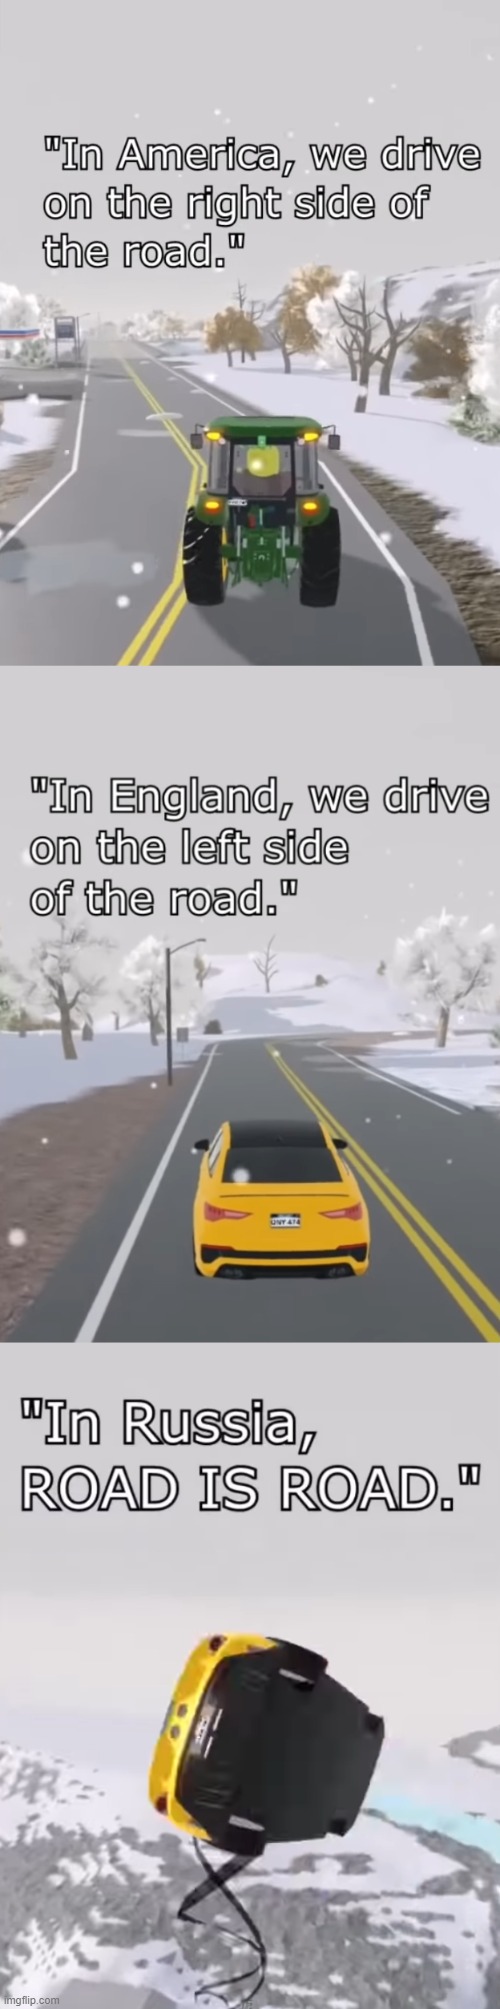 In Russia, ROAD IS ROAD | image tagged in america,england,russia,road is road,left side,right side | made w/ Imgflip meme maker